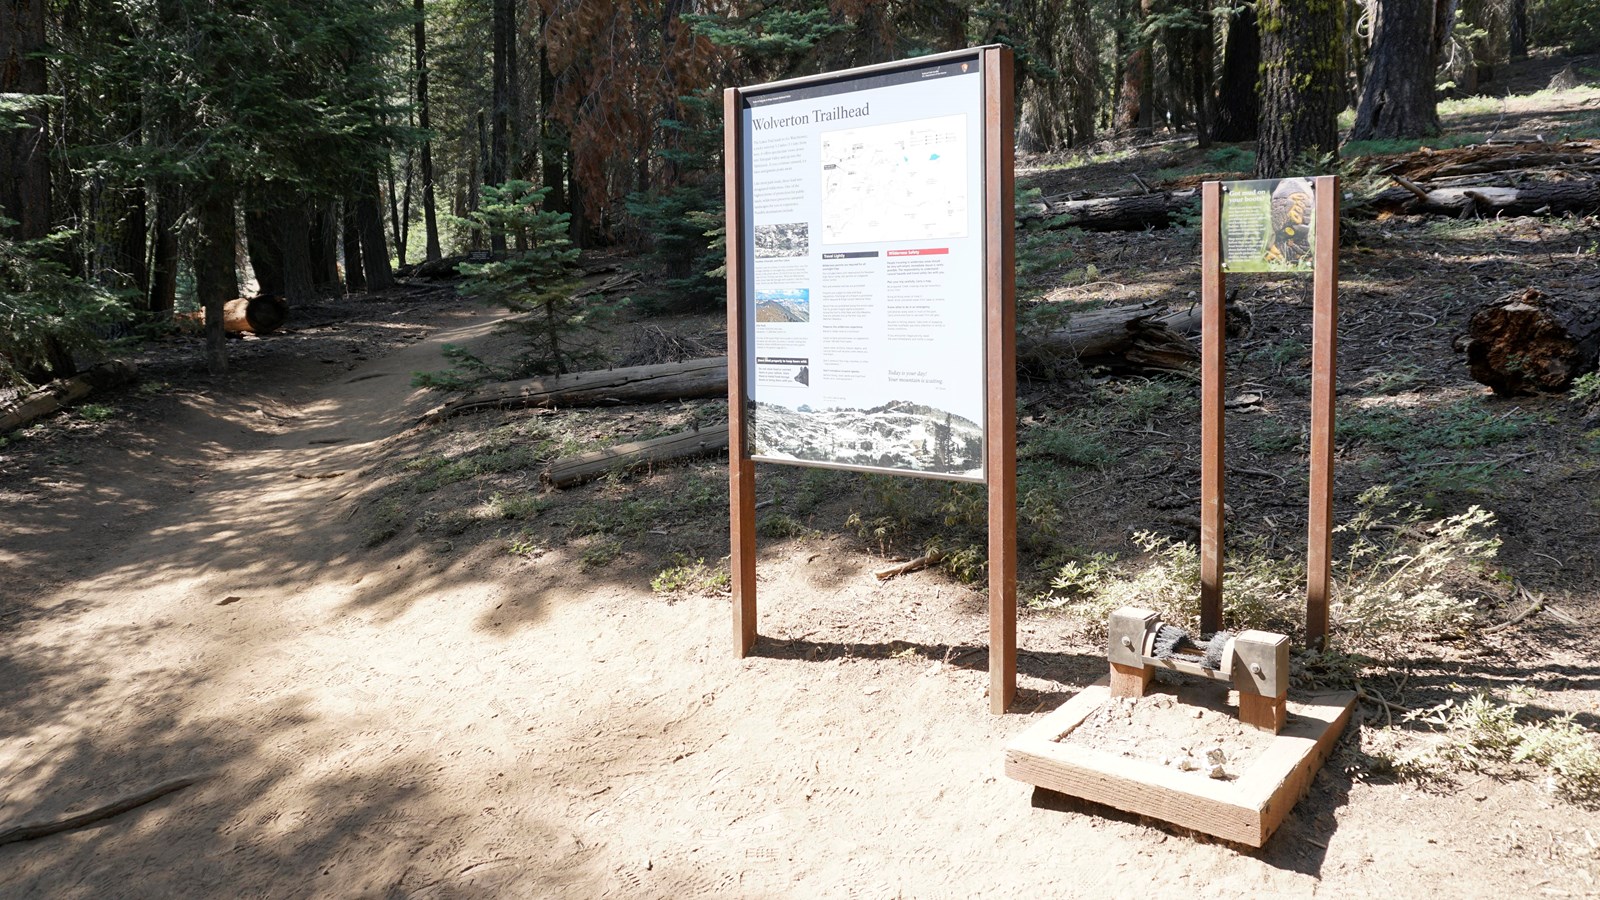 A metal framed sign with information about Wolverton stands in front of a shade covered trail